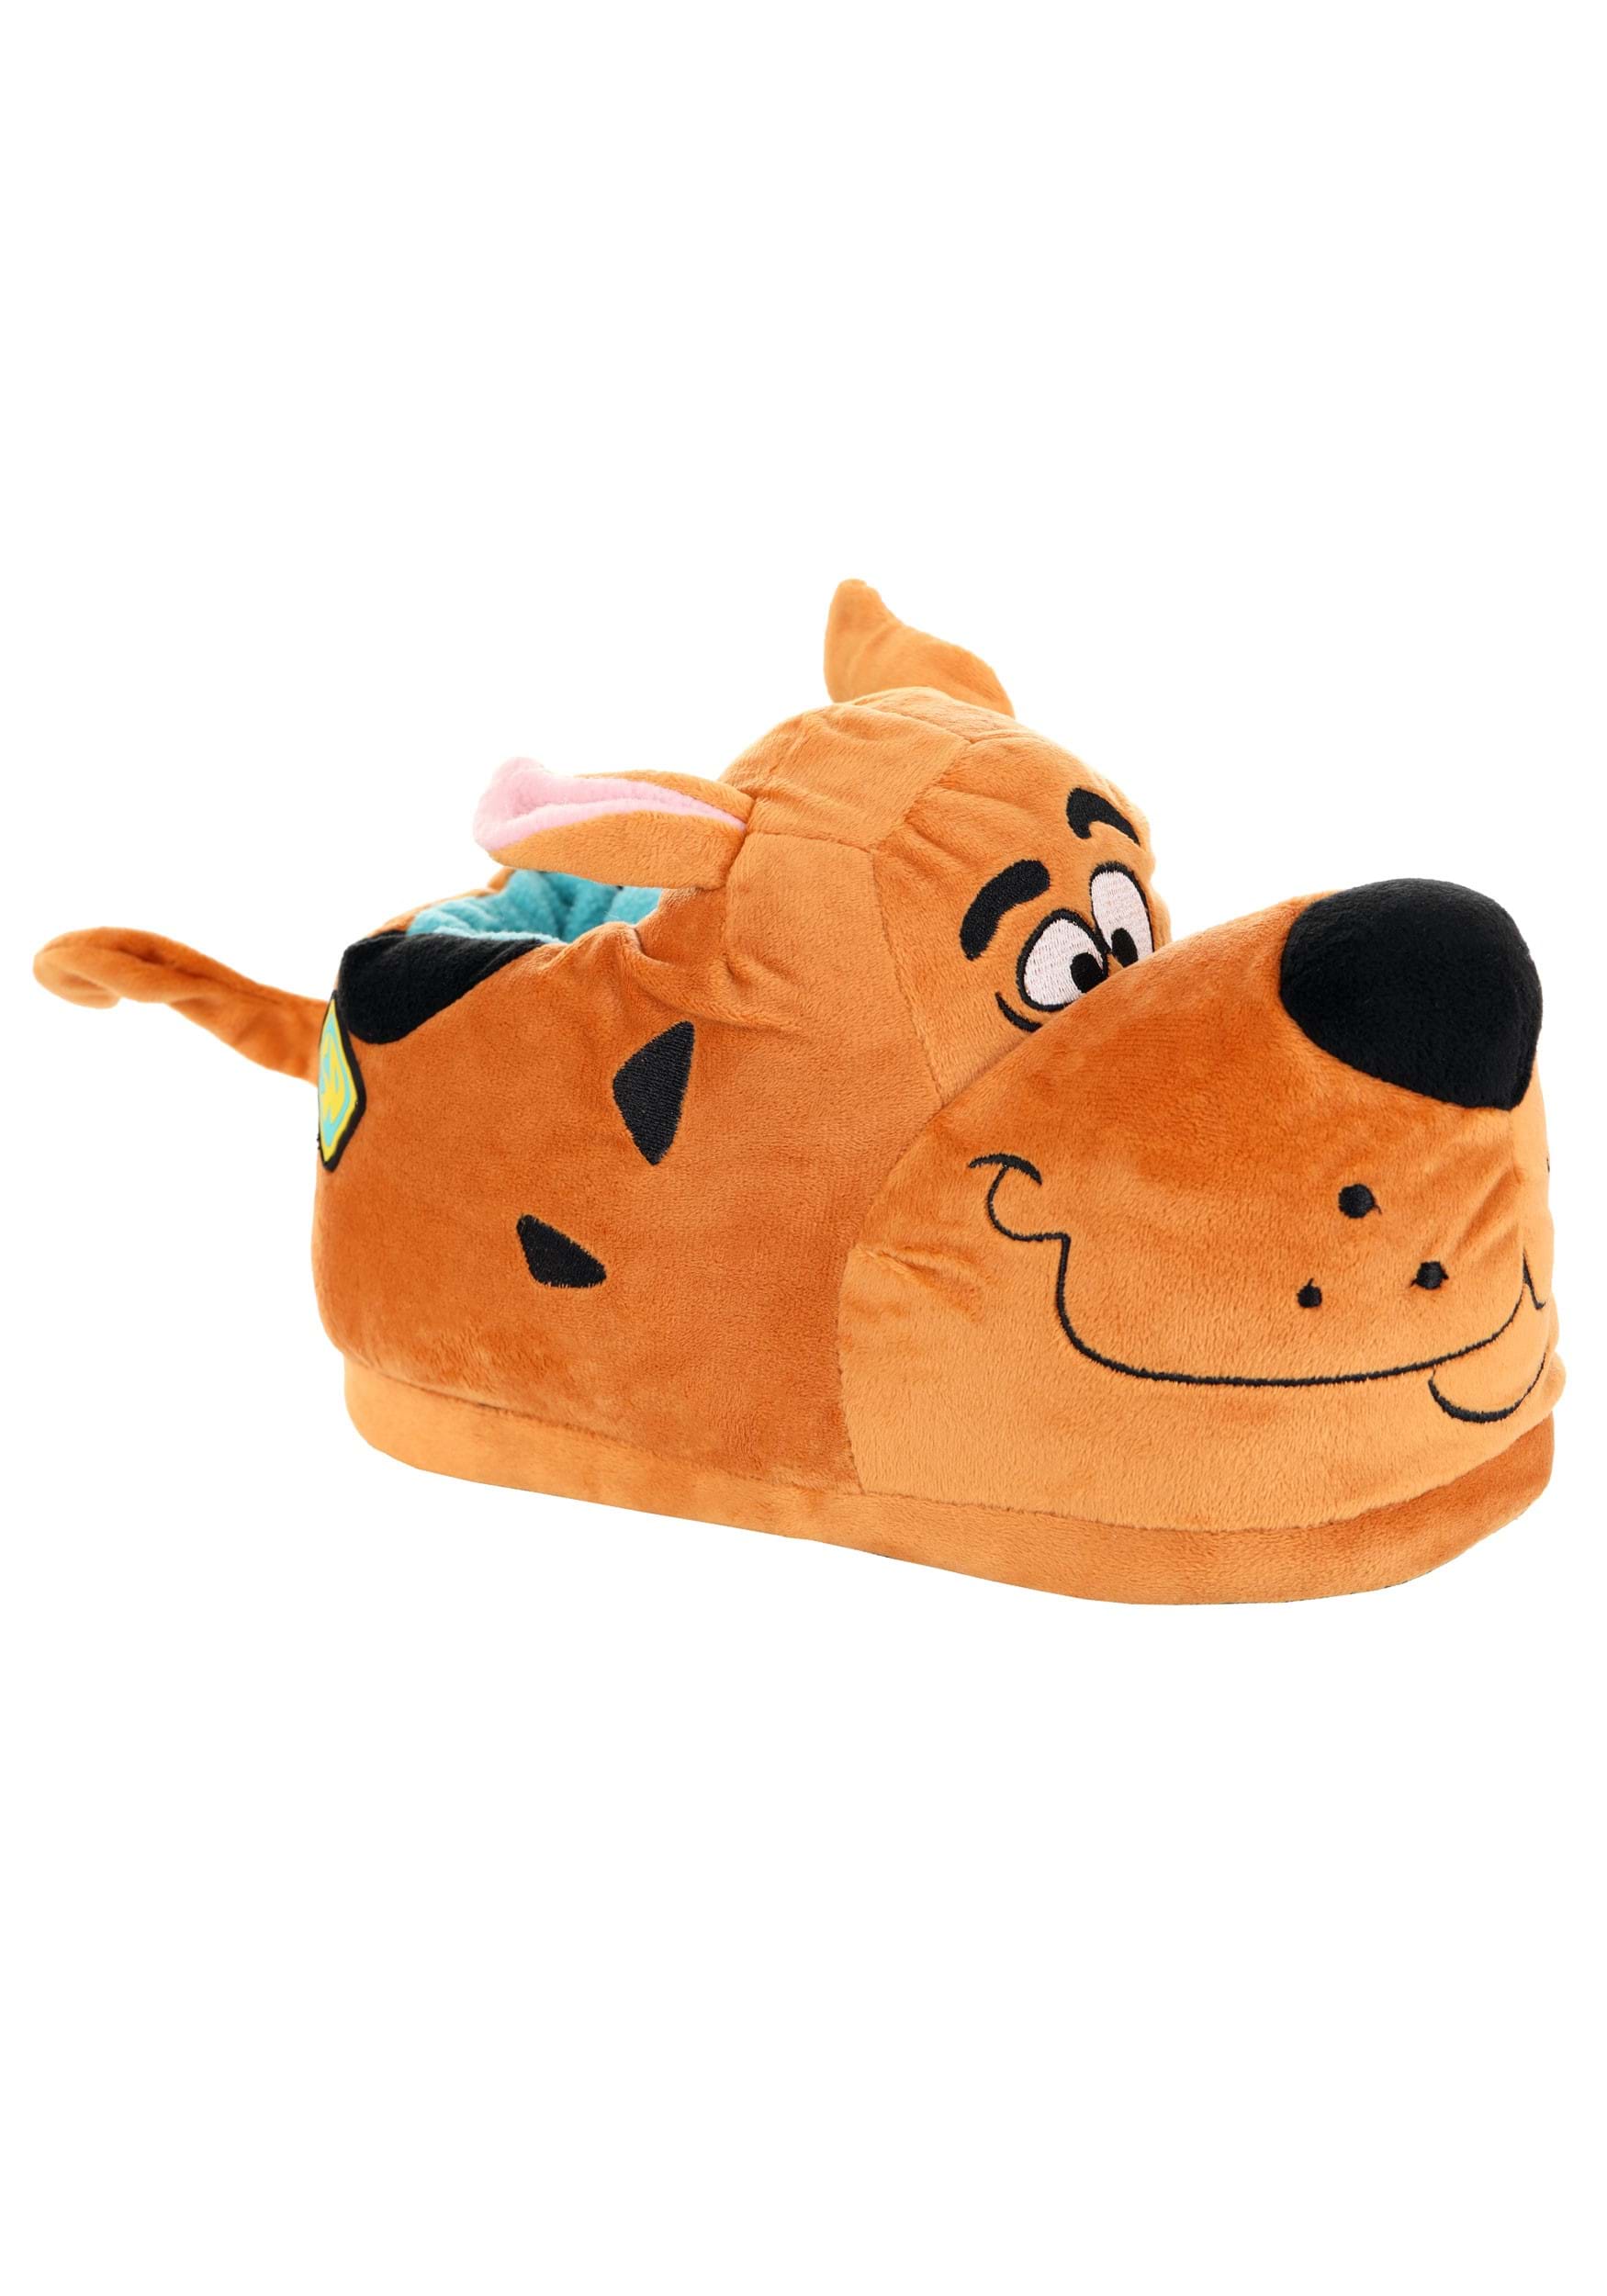 Scooby Doo Slipper For Adults